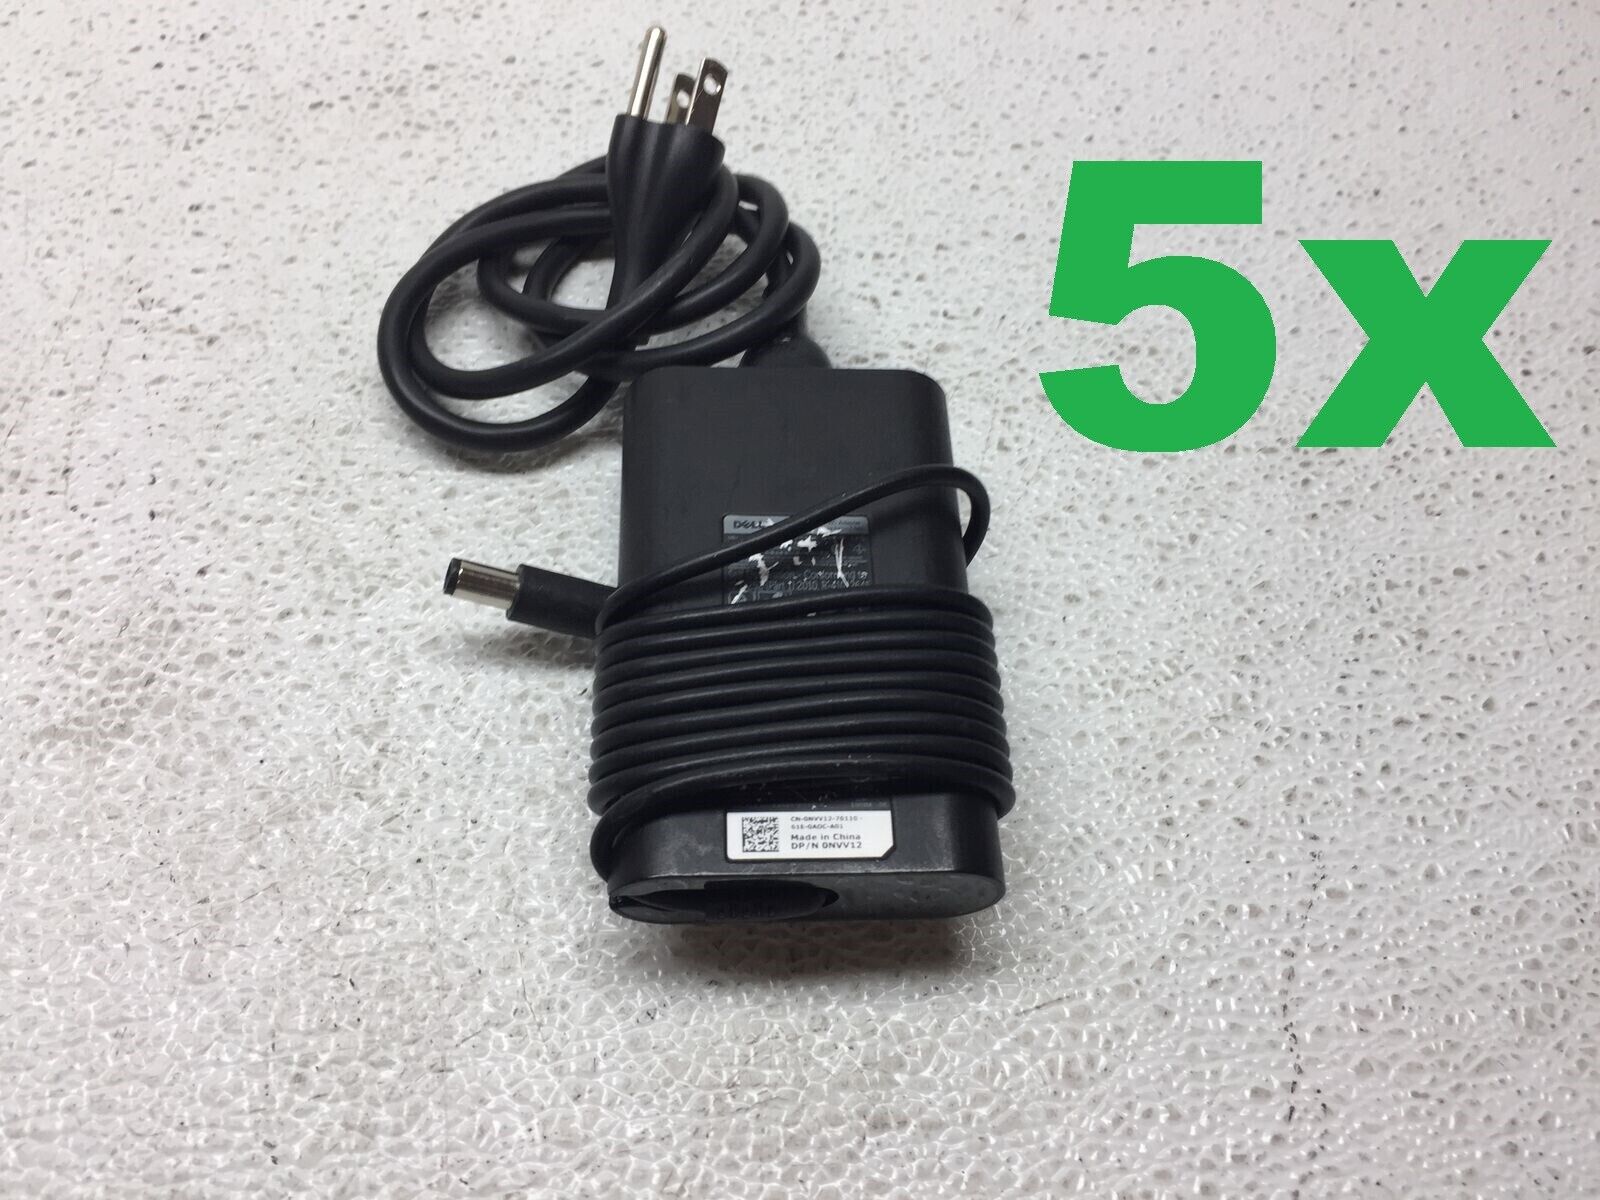 Mixed Lot of 5 Genuine Dell 65W 19.5V 3.34A Adapter Chargers LA65NM130 HA65NM130